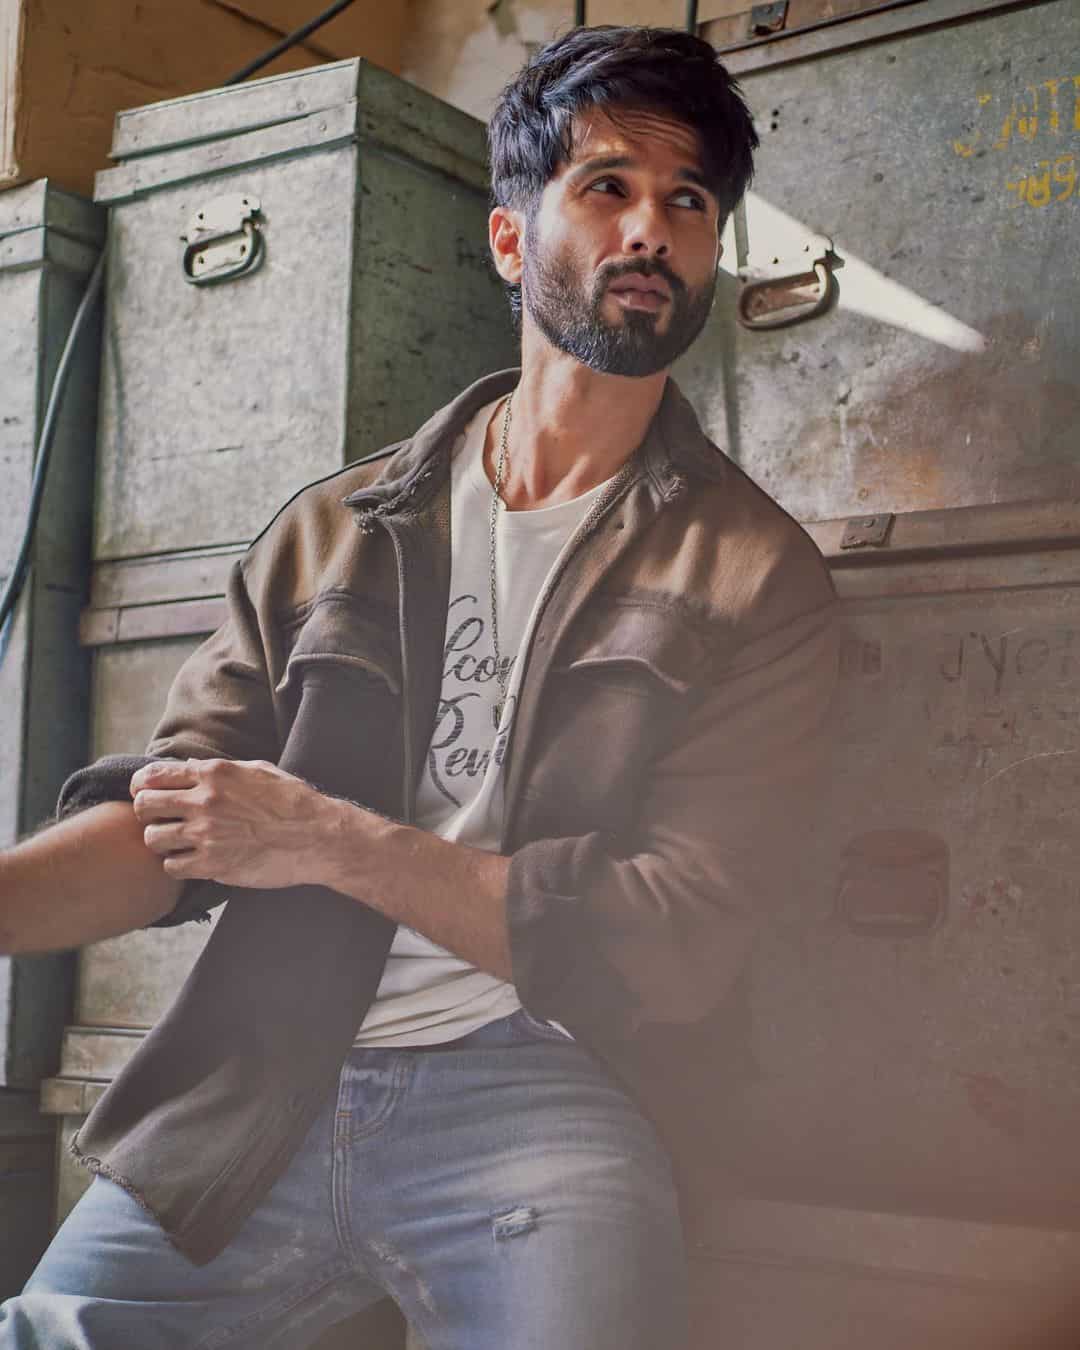 Photos Shahid Kapoor spotted at a cafe (2) | Shahid Kapoor Images -  Bollywood Hungama